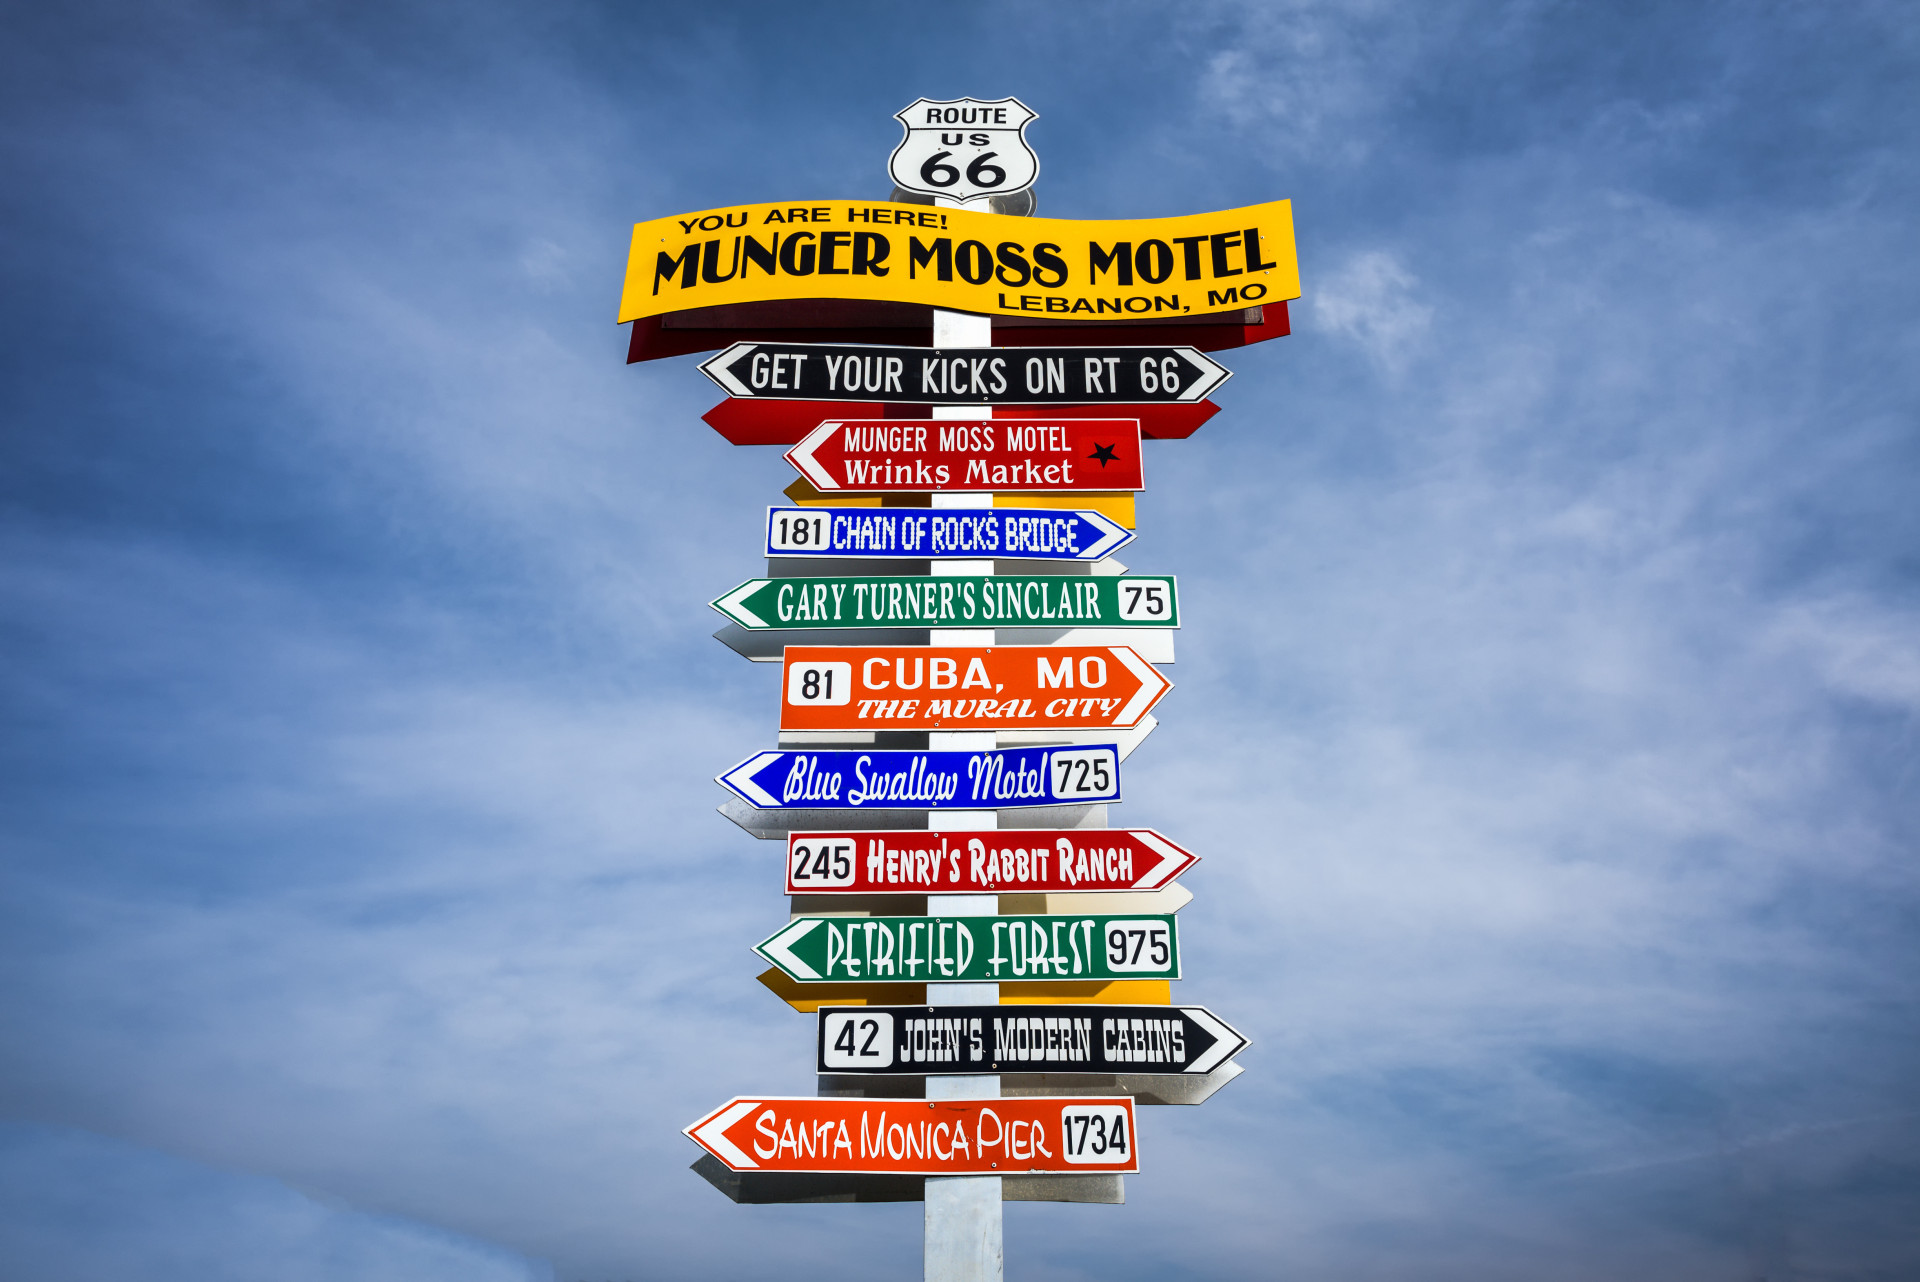 The eye-catching direction signpost at the Munger Moss Motel, Lebanon. It advertises the names of famous attractions on Route 66.